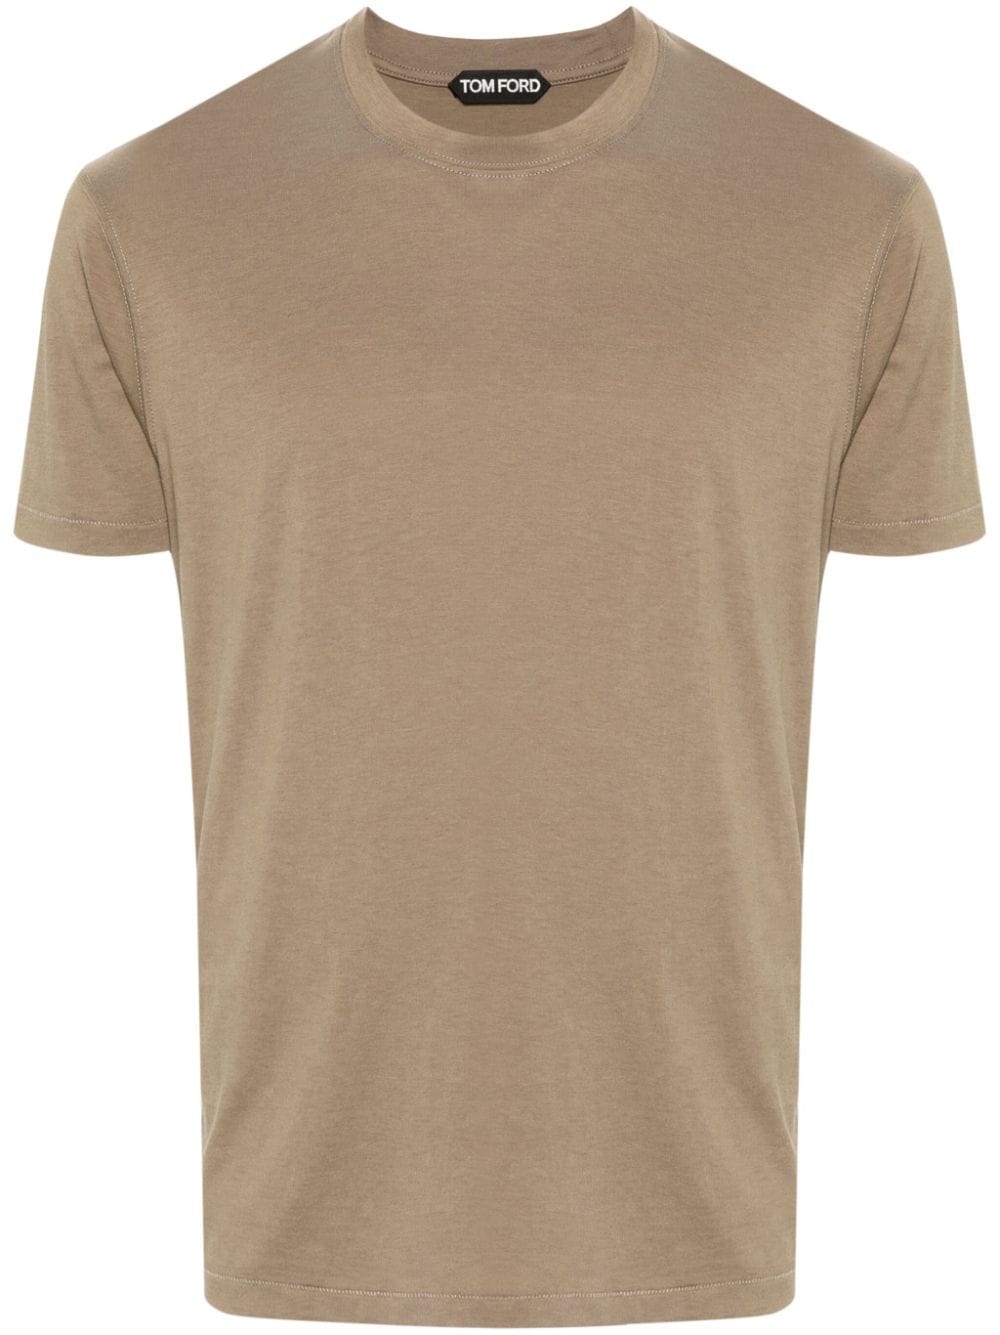 TOM FORD heathered jersey T-shirt - Green von TOM FORD